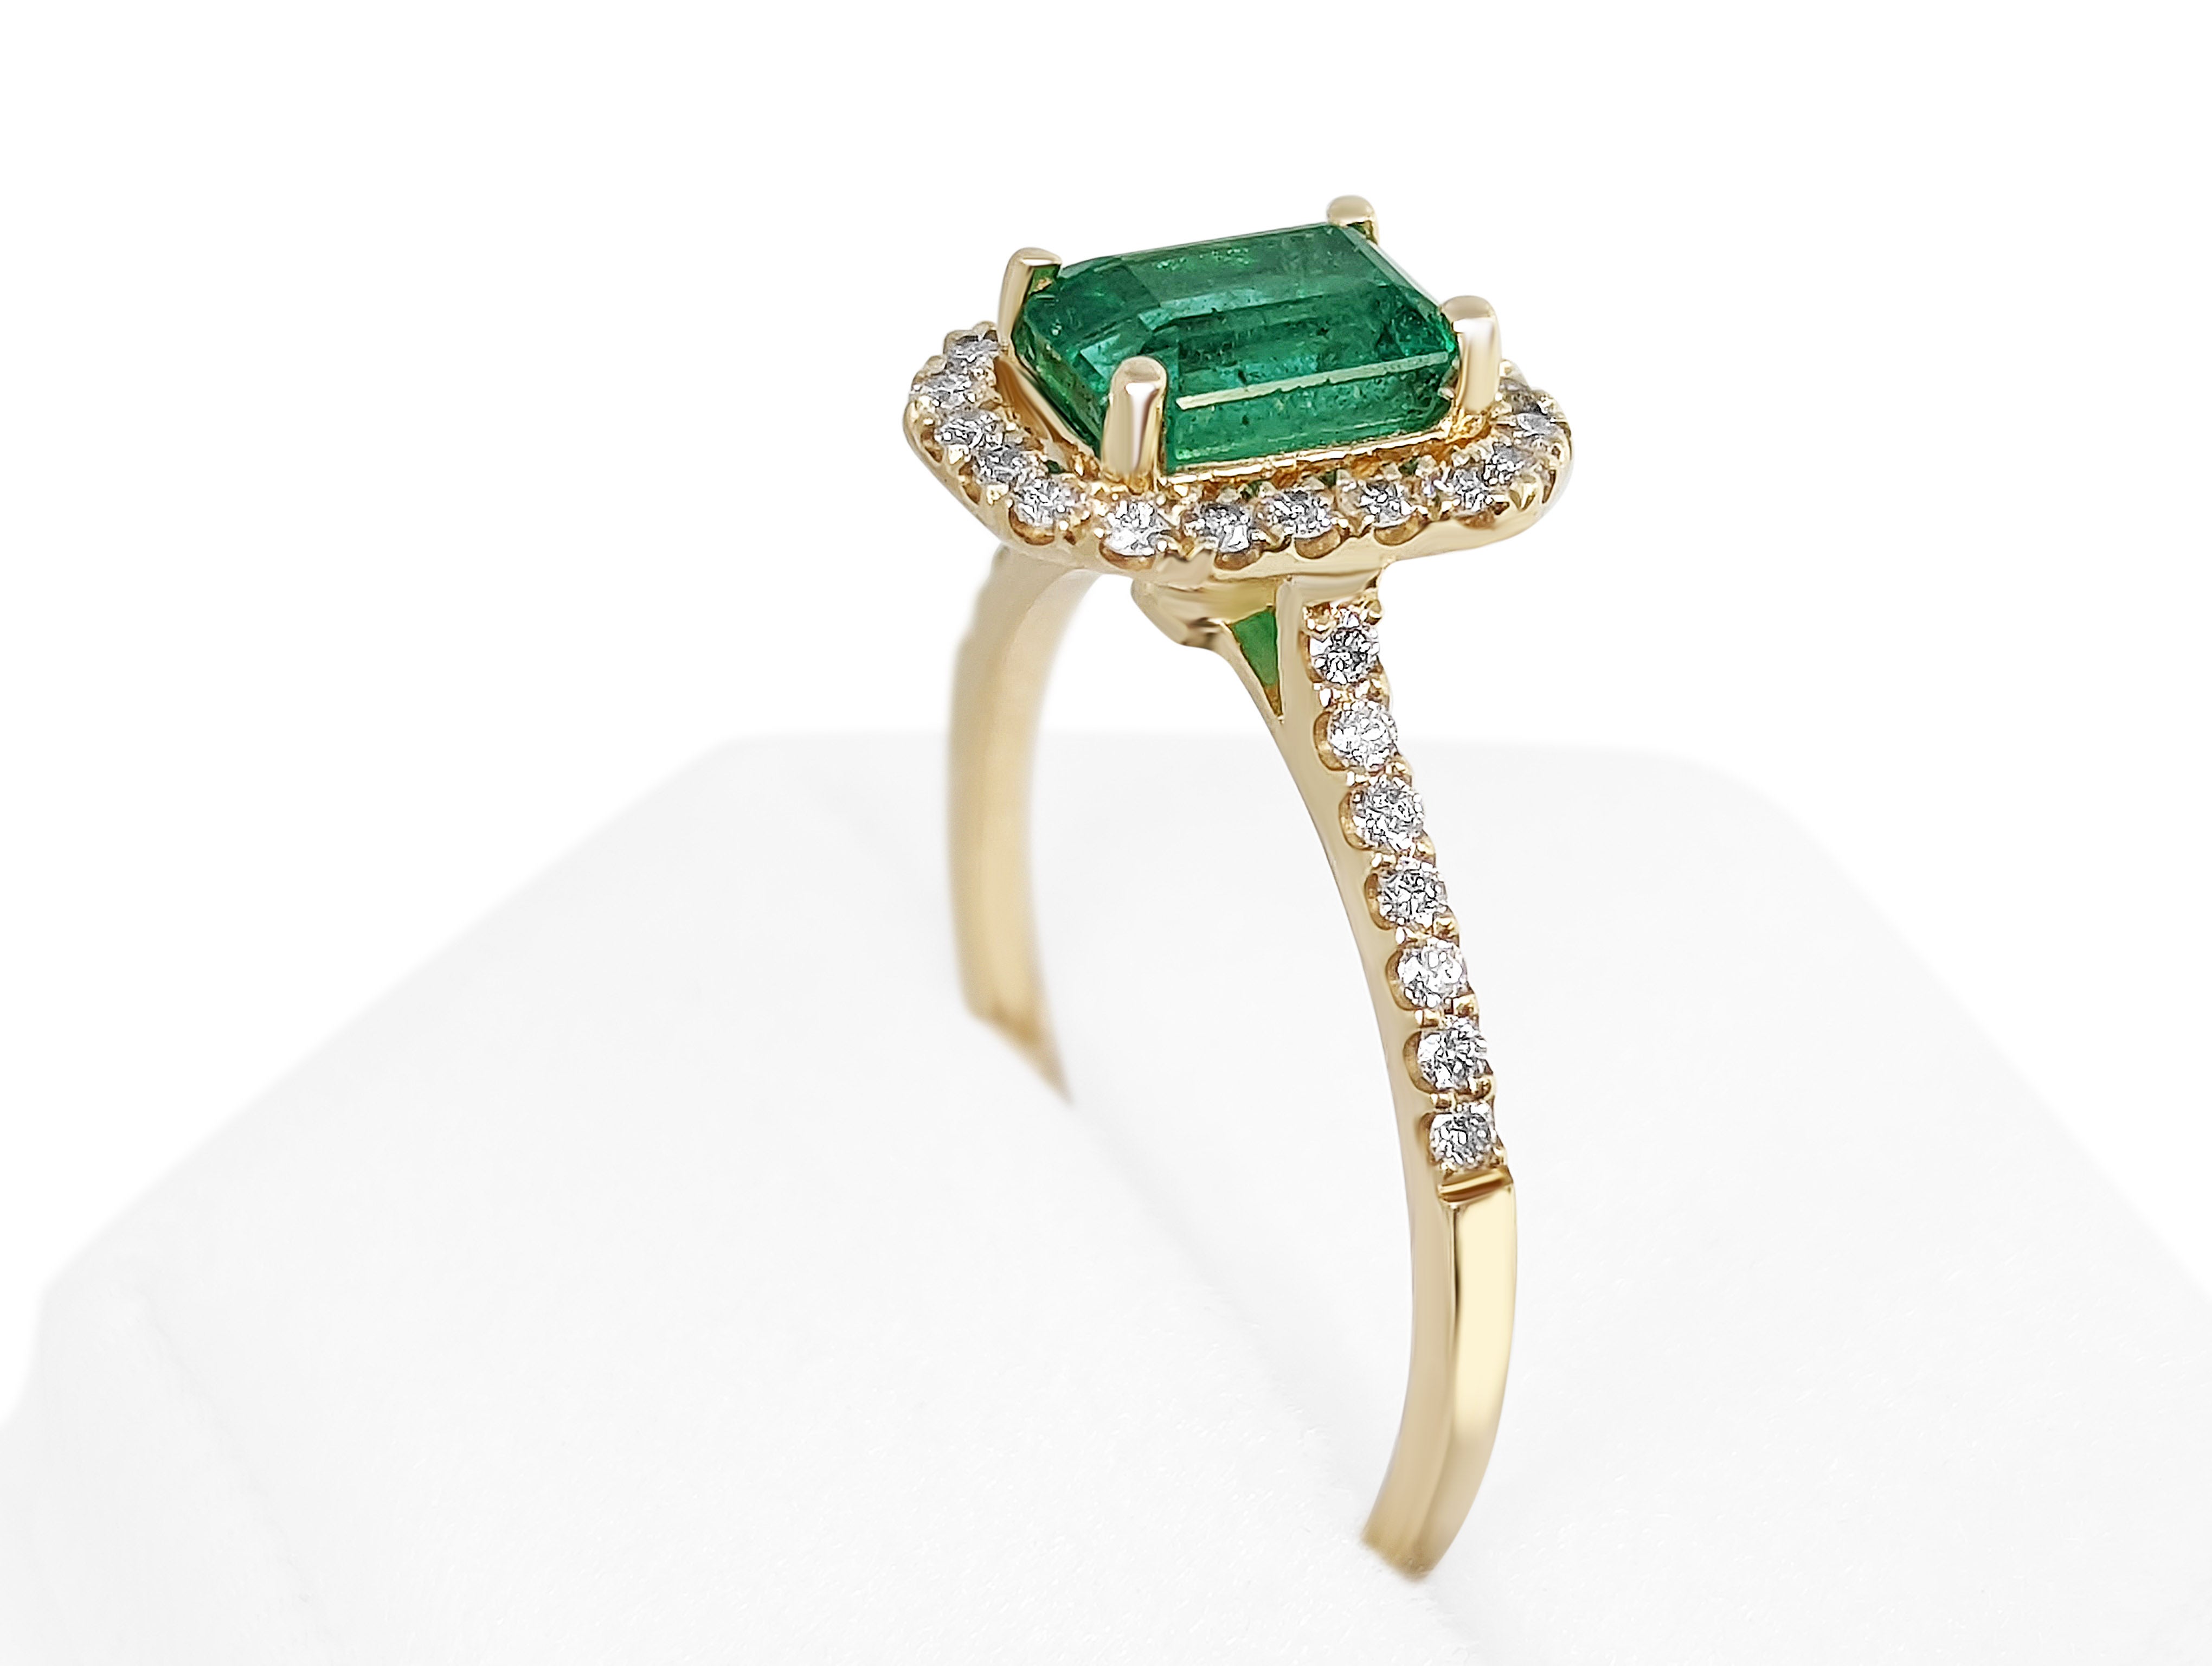 Ring can be sized free of charge prior to shipping out.

Center Stone:
___________
Natural Emerald
Cut: Cut Cornered Rectangle Step Cut
Carat: 1.10 ct
Color: Green

Side Stones:
___________
Natural Diamonds
Cut: Round 
Carat: 0.30 tccw / 34